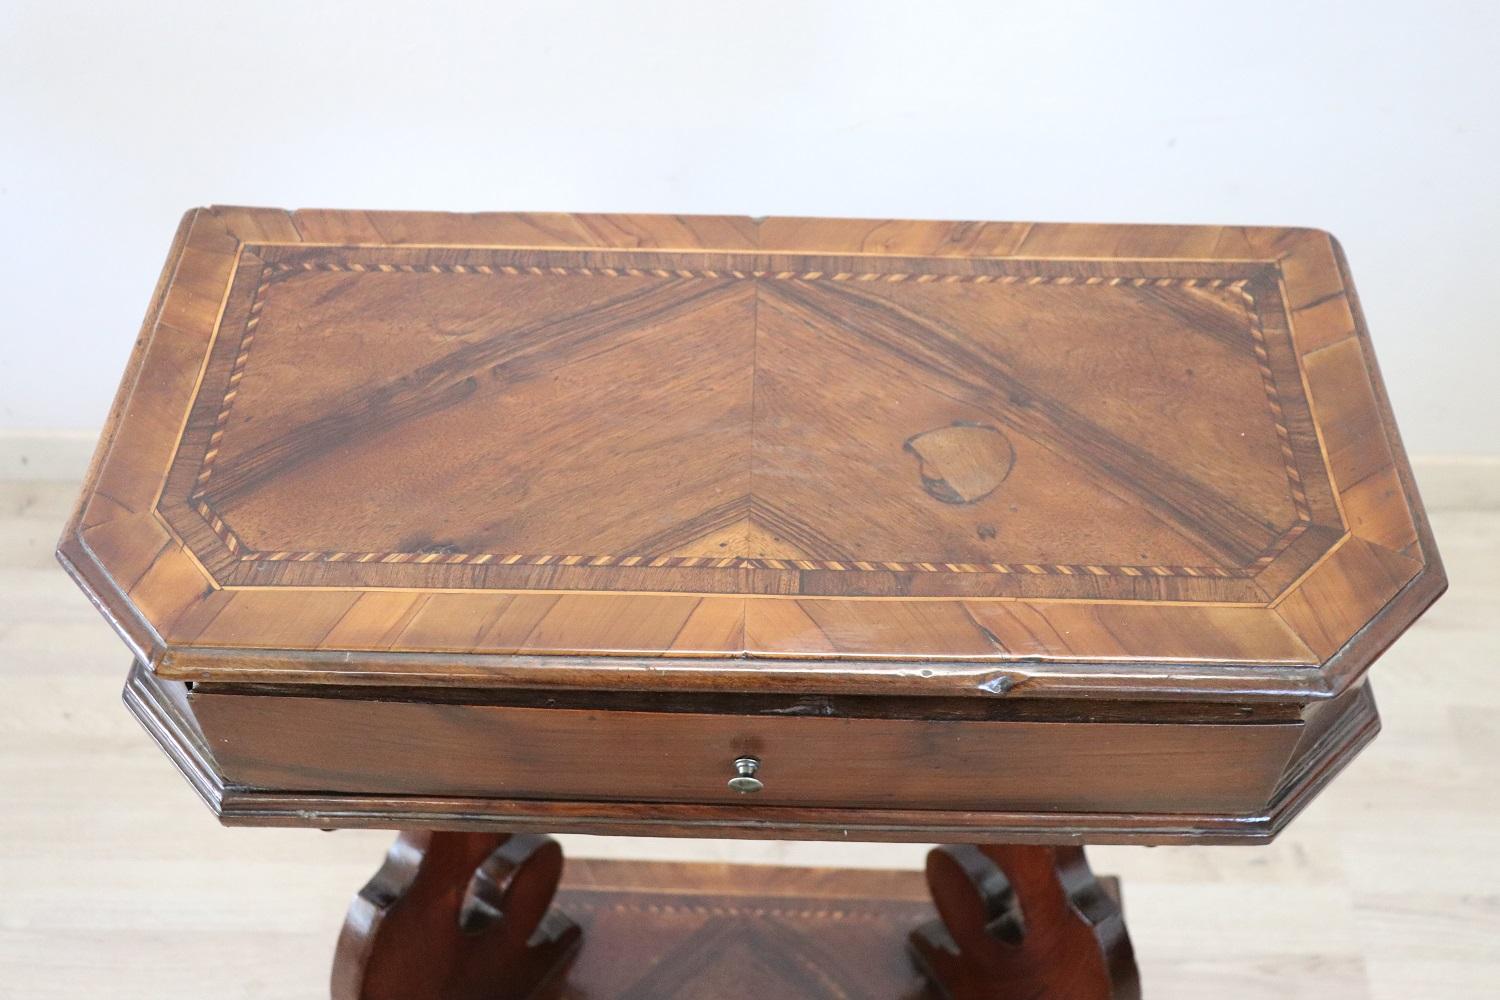 Rare antique Italian kneeler, 1780s.V ery refined made of walnut wood with small geometric inlaid decorations. Equipped with two practical drawers. Place this elegant antique Arma Christi prayer chair in your bedroom for daily devotions.